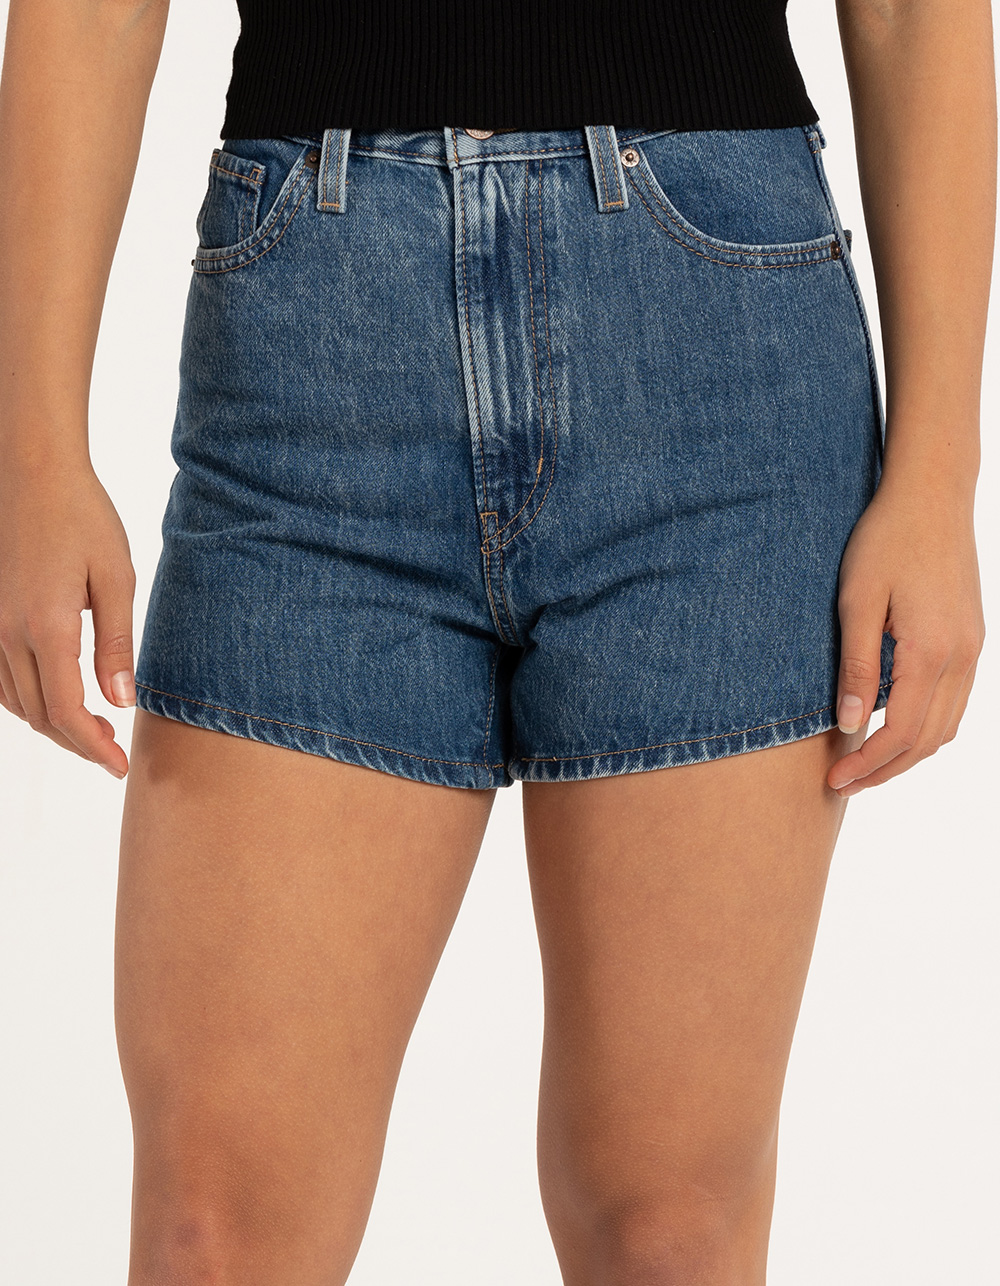 Levi's high waisted mom shorts in light wash blue